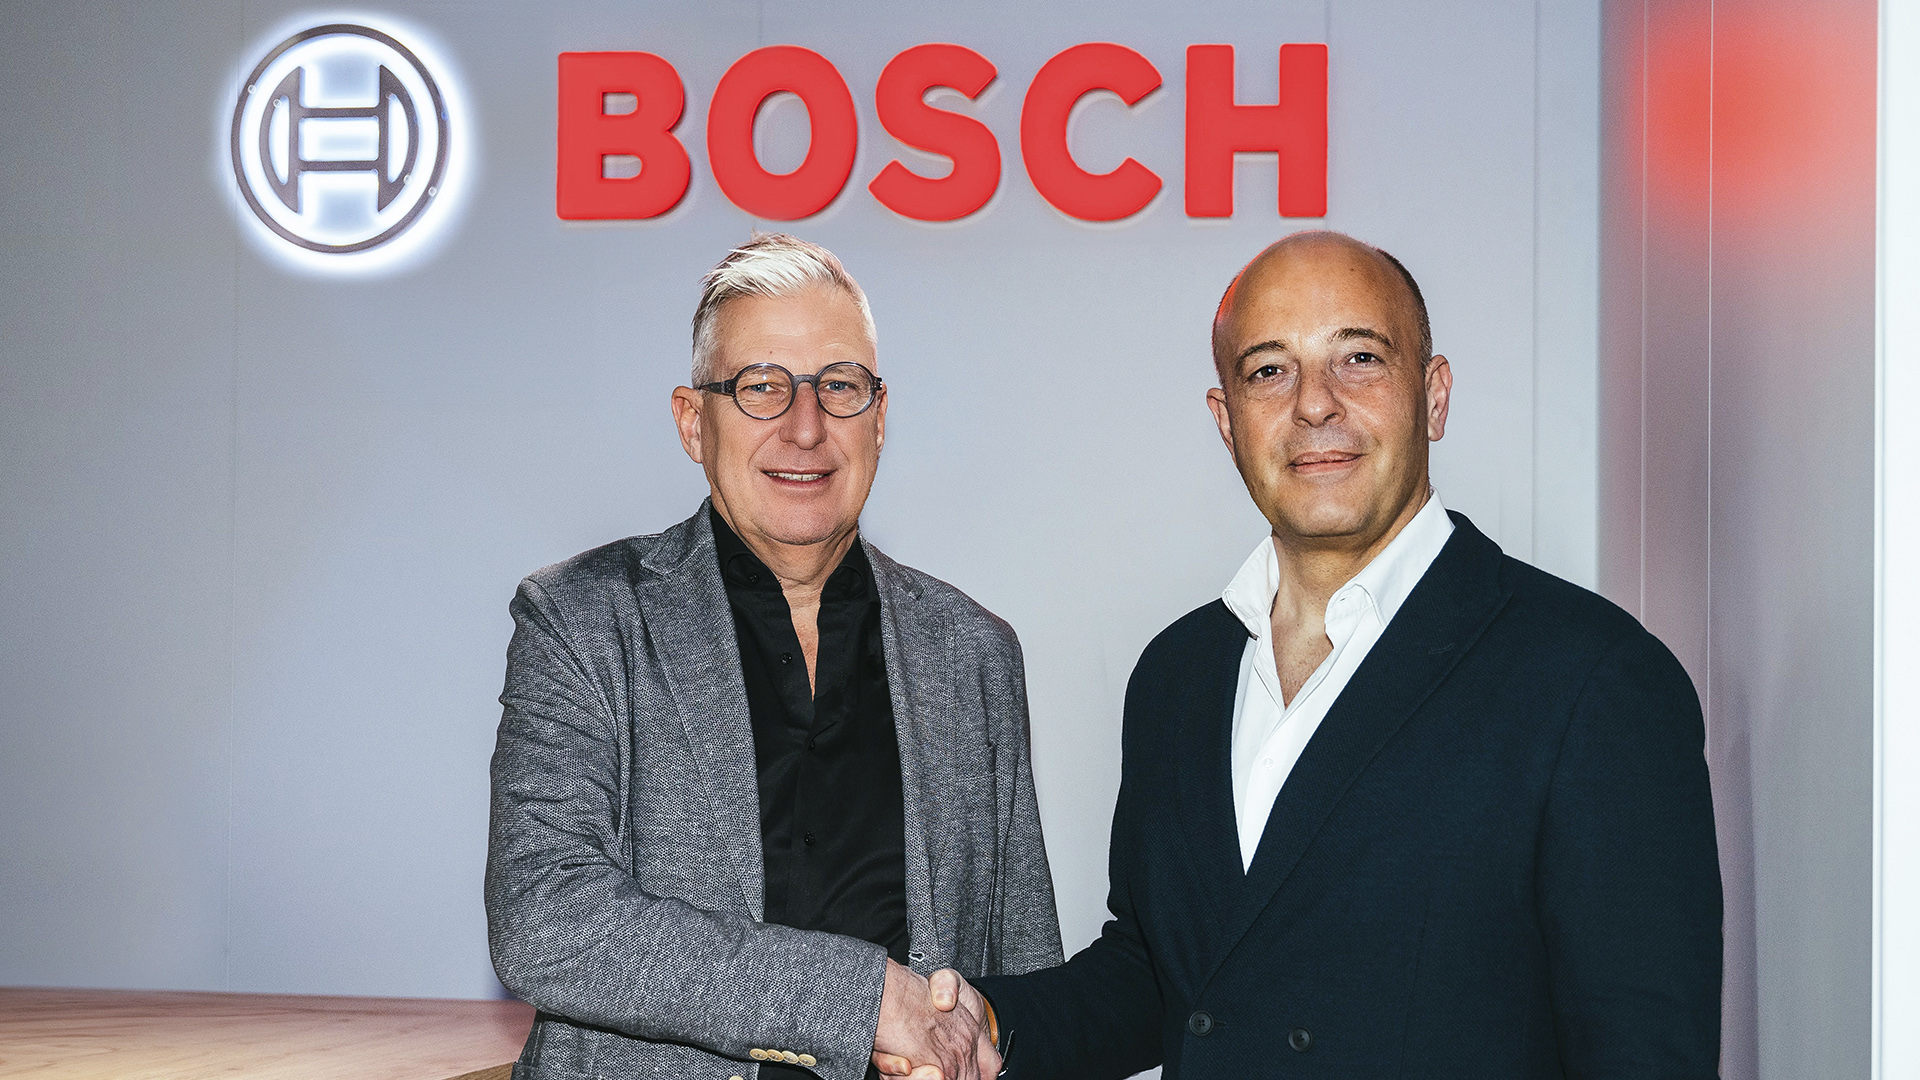 Complete vehicle engineering from a single source: EDAG and Bosch Engineering agree to project-based collaboration